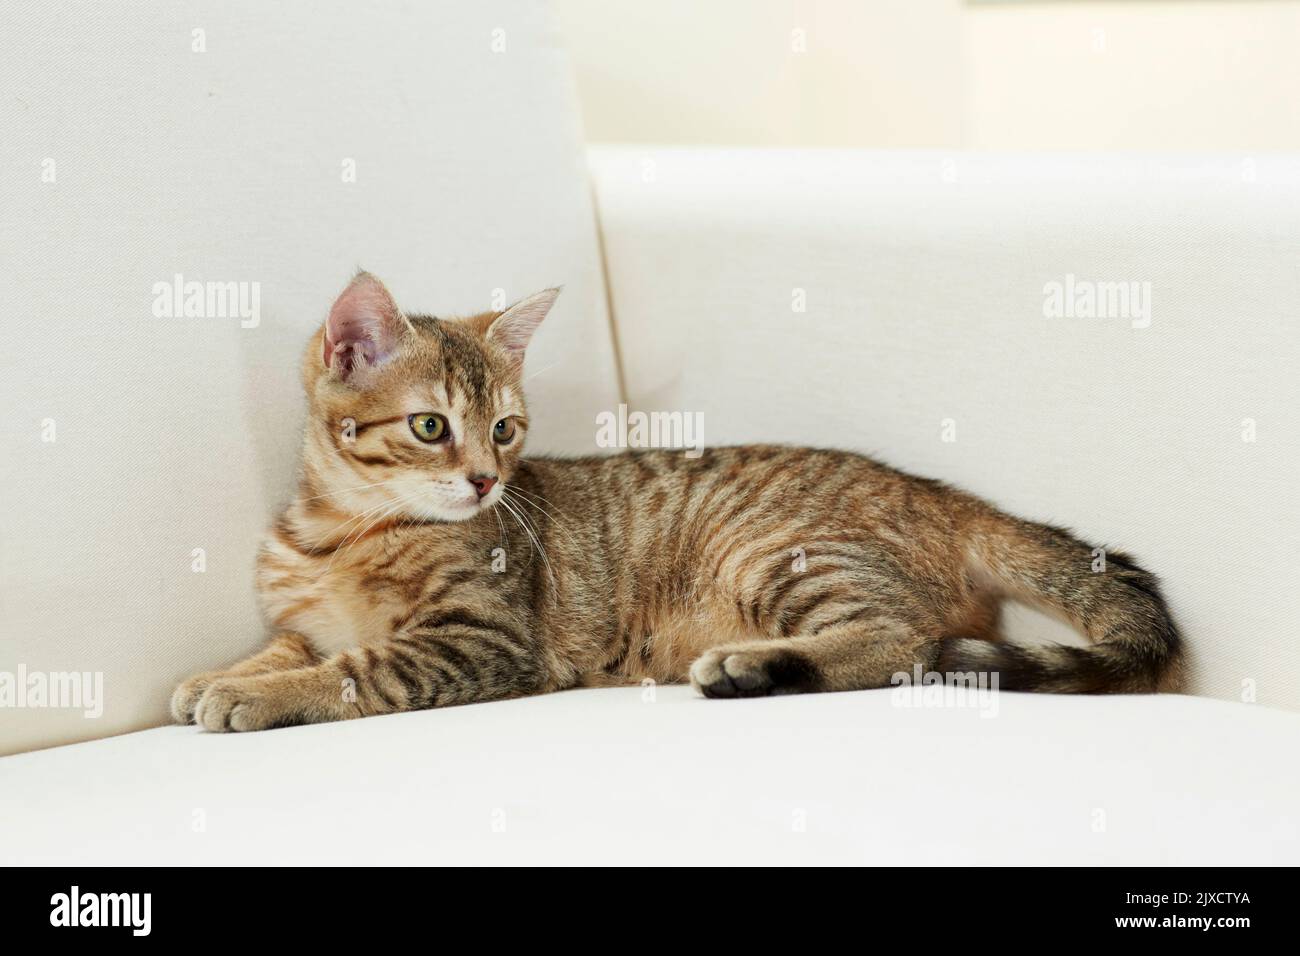 Domestic cat.  Tabby kitten resting on a couch. Germany Stock Photo